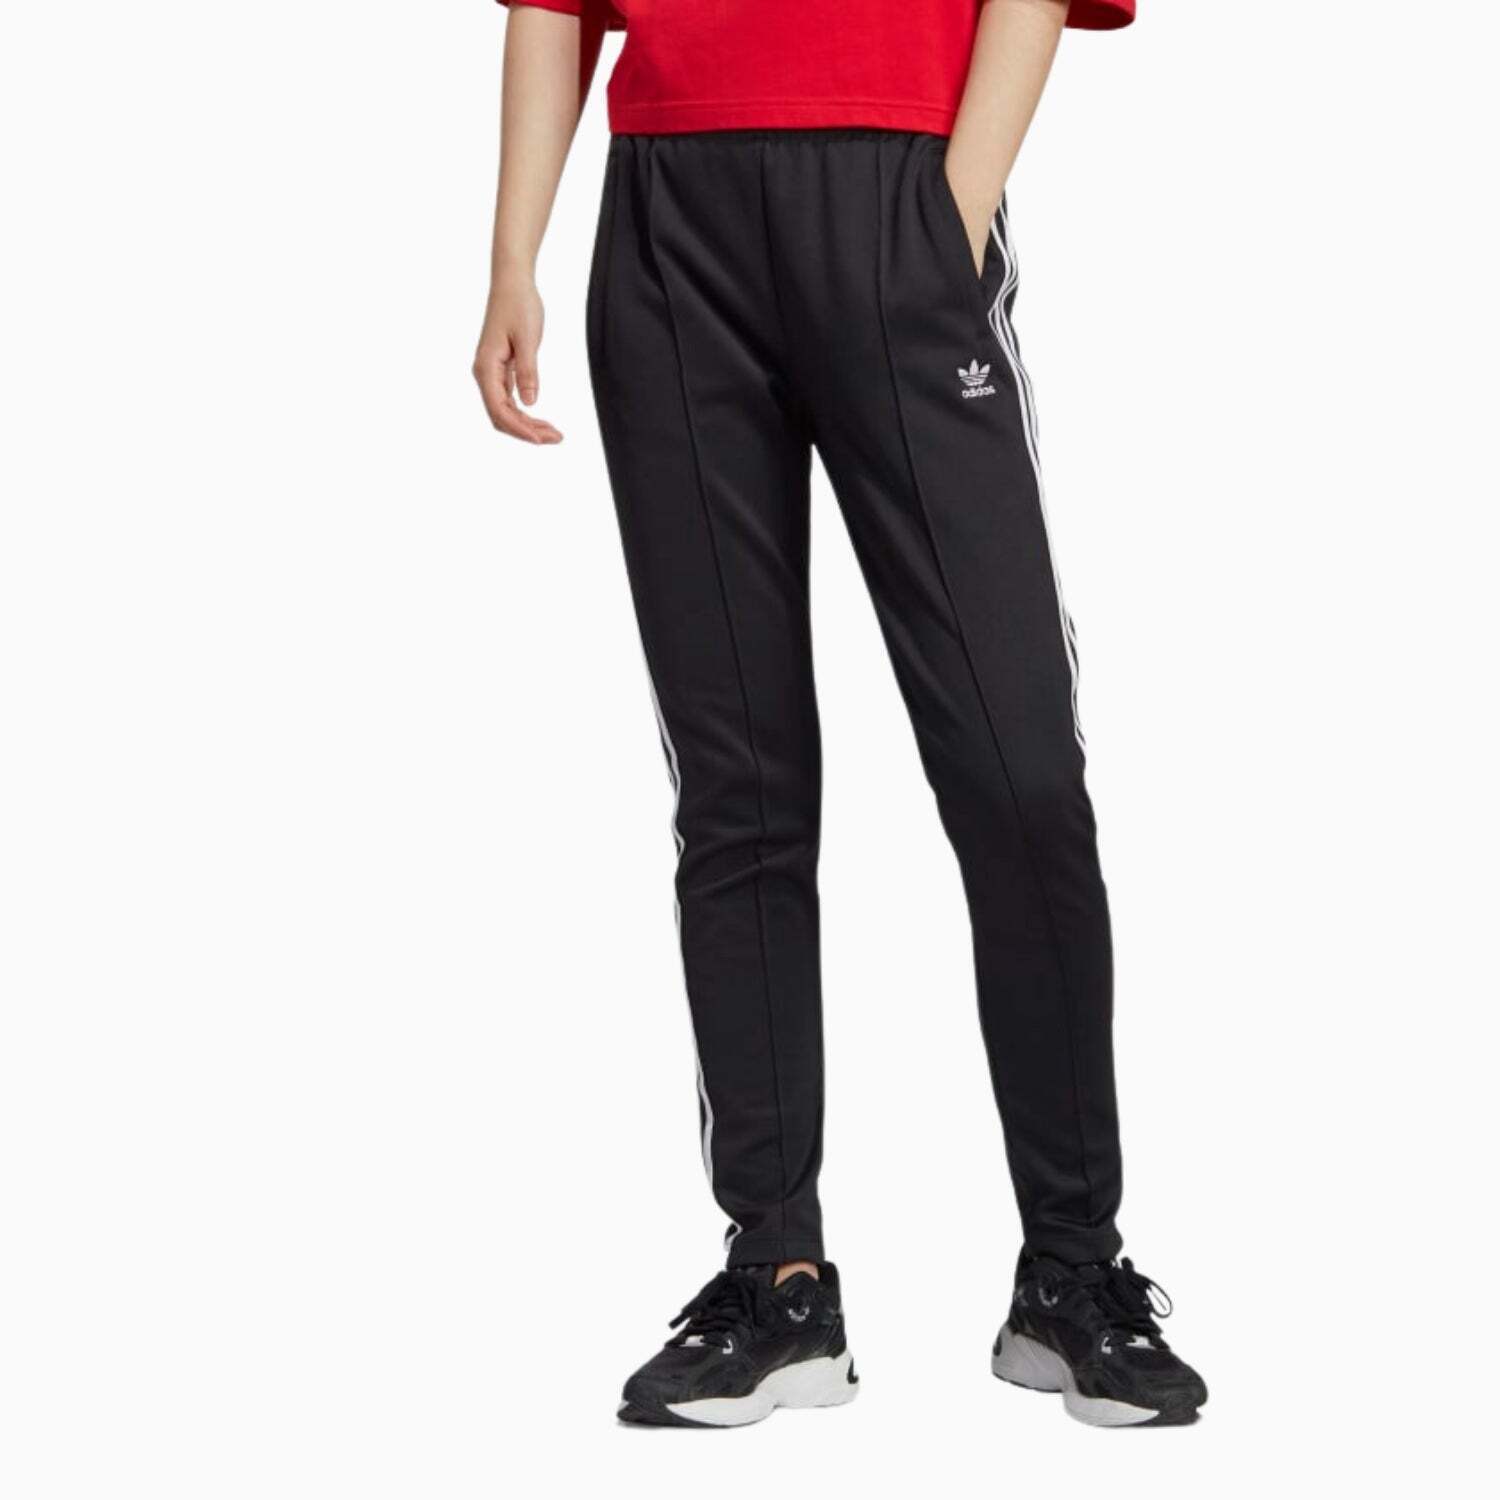 Women's Adicolor SST Track pant(COMP OUTFIT)